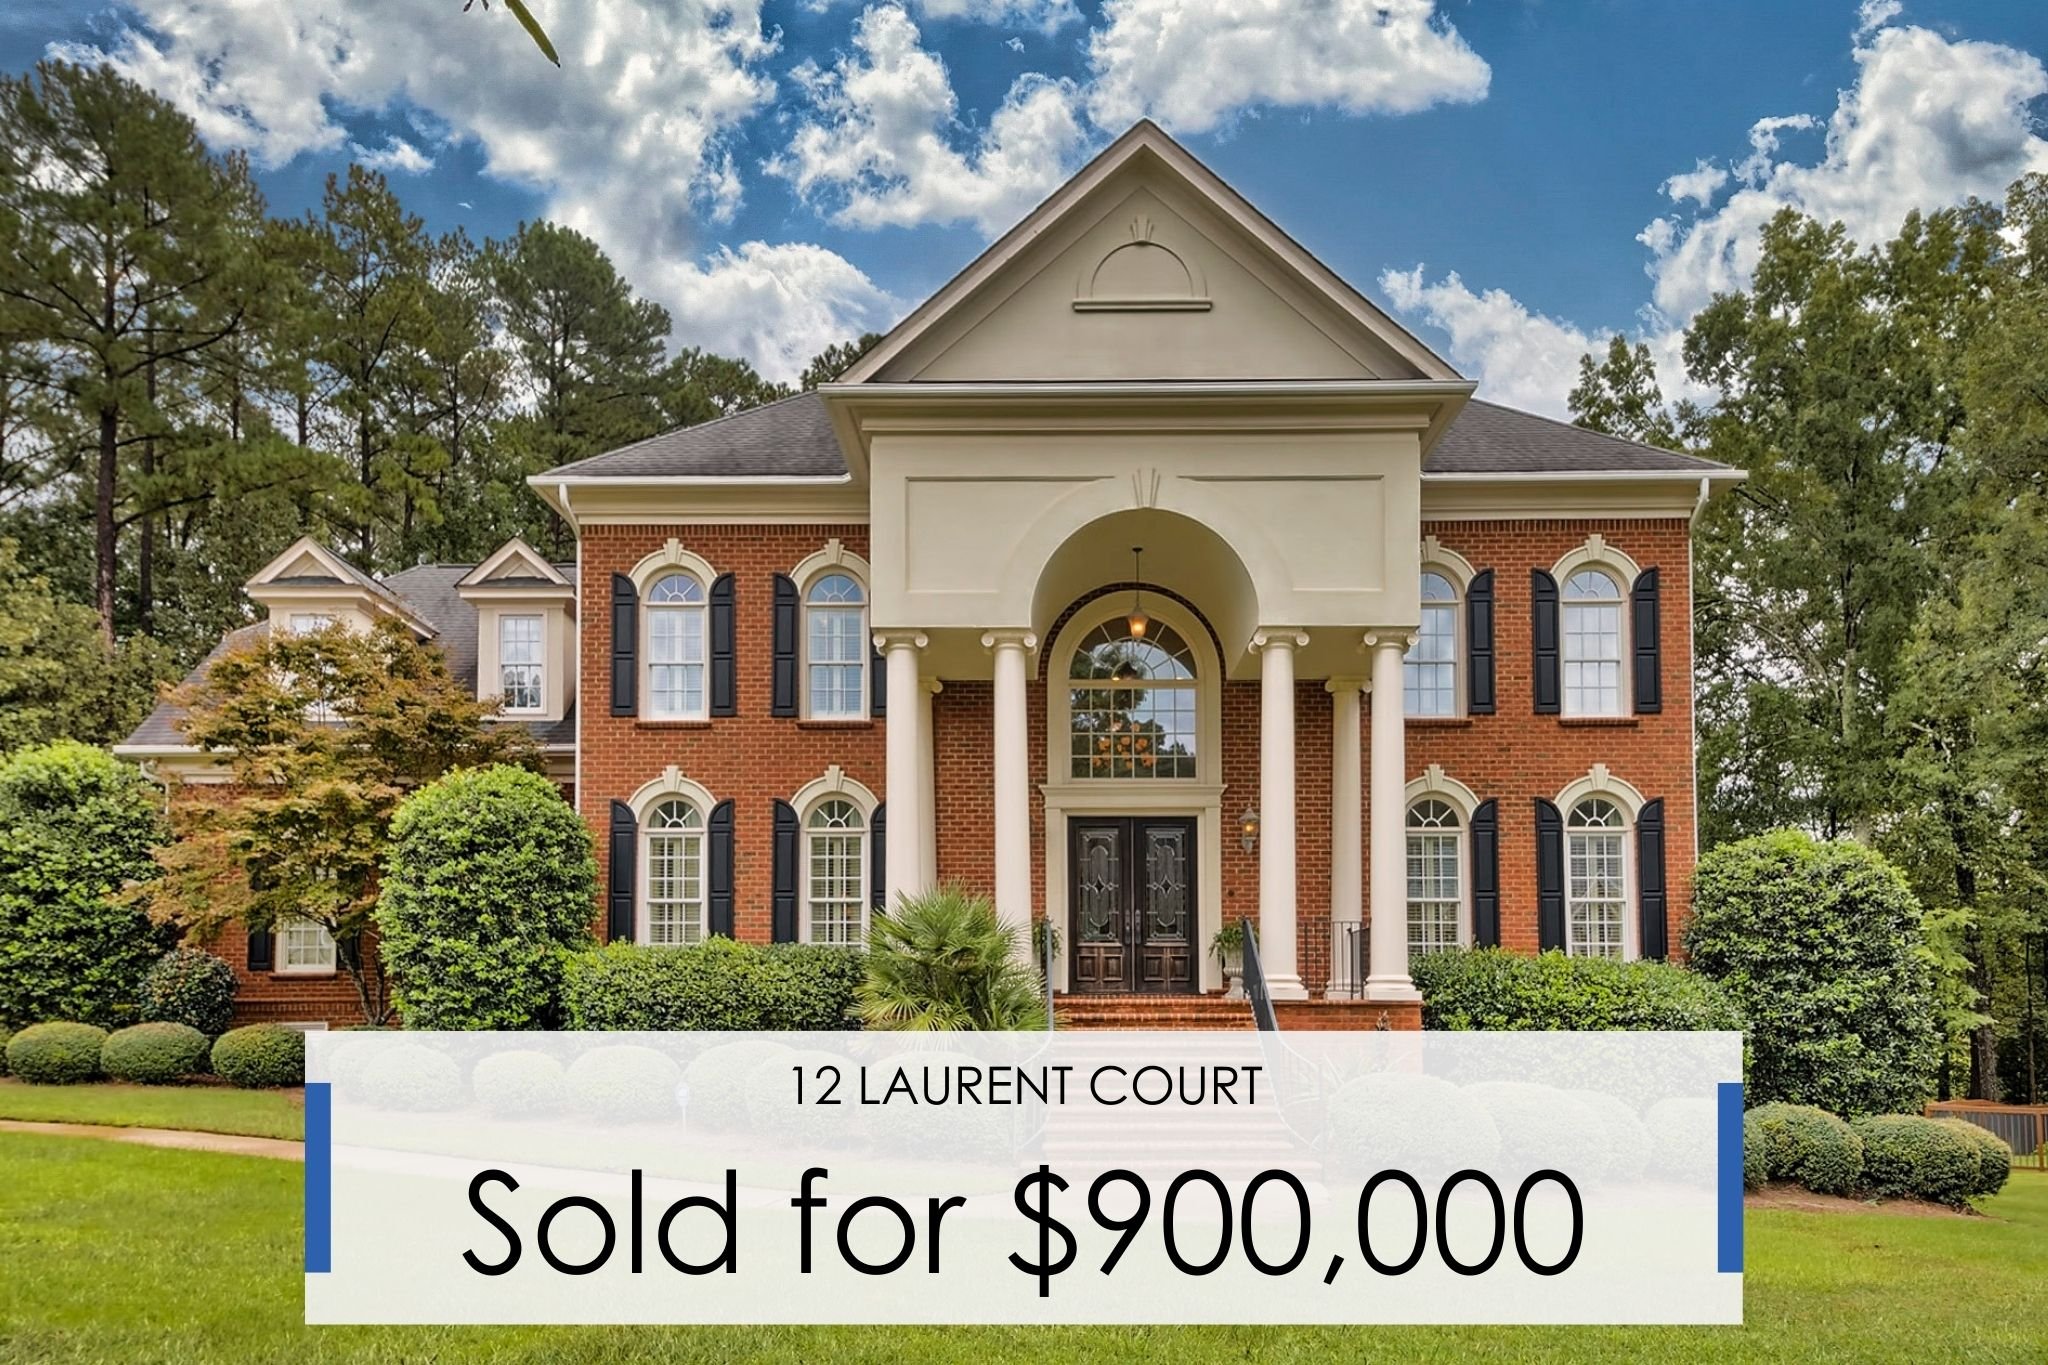 12 Laurent Court | Sold for $900,000